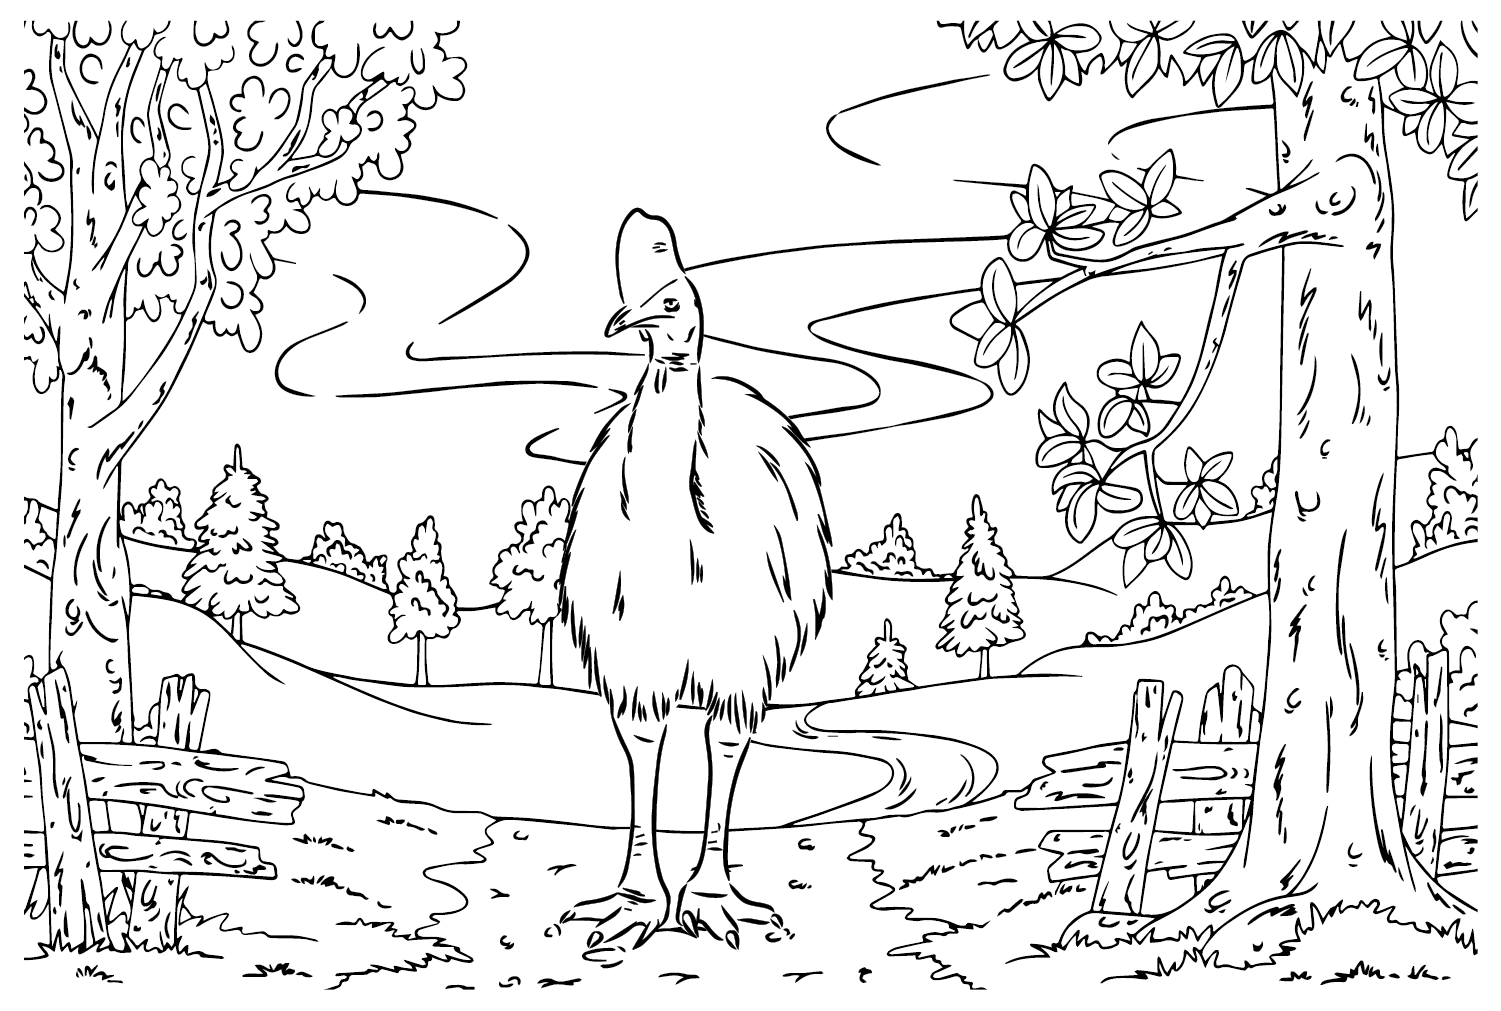 Cassowary Picture to Color from Cassowary